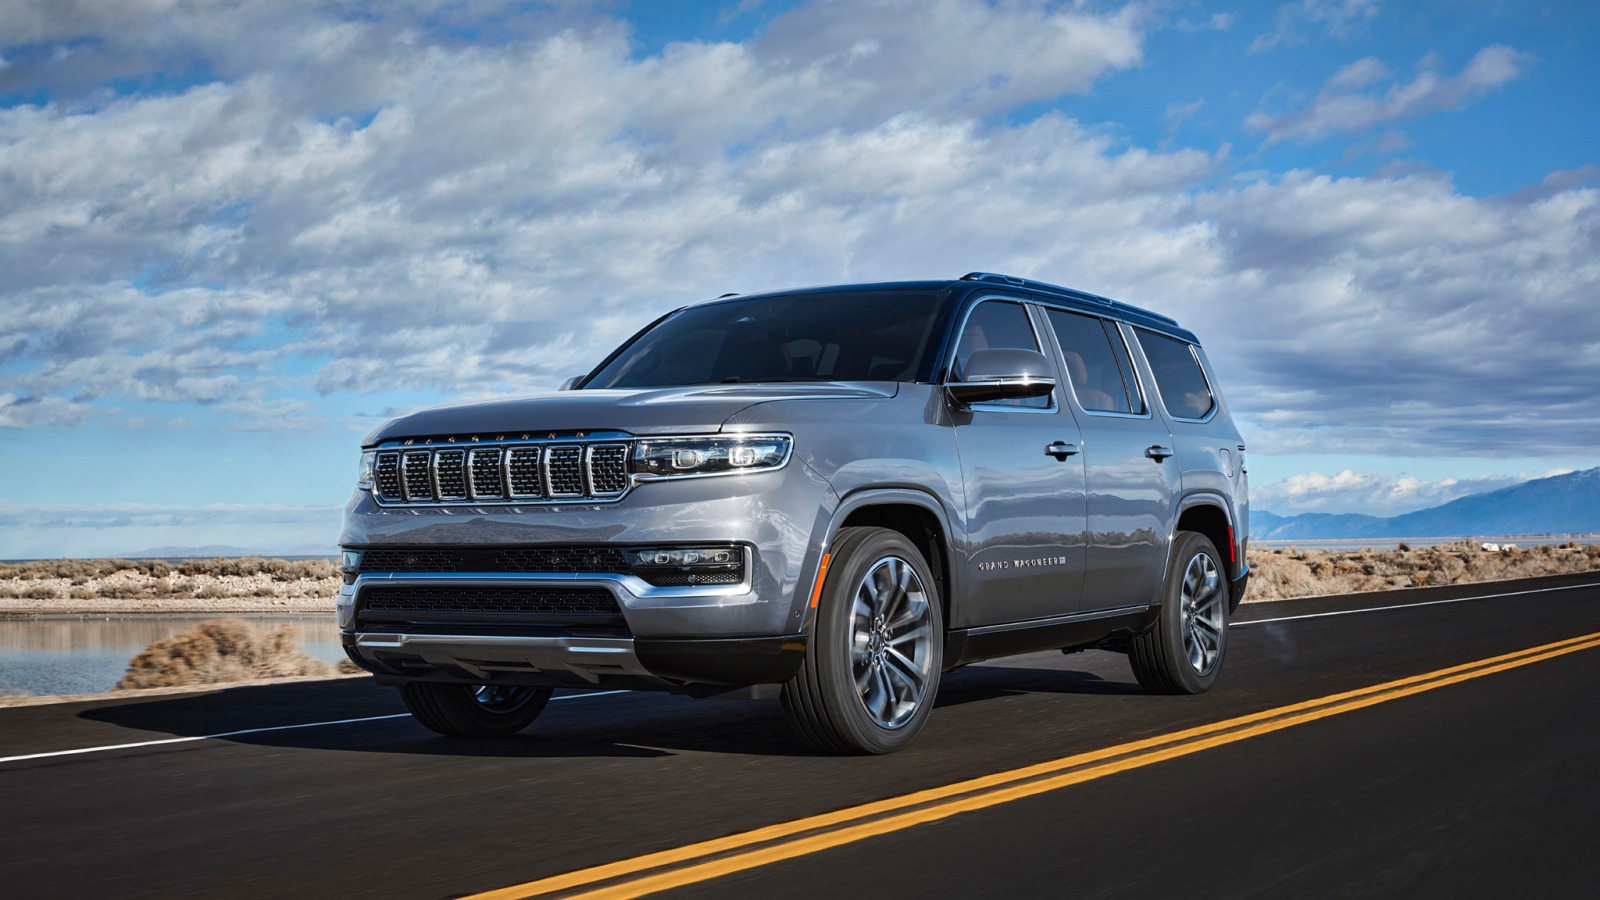 Priced: 2022 Jeep Grand Wagoneer Starts at $87K